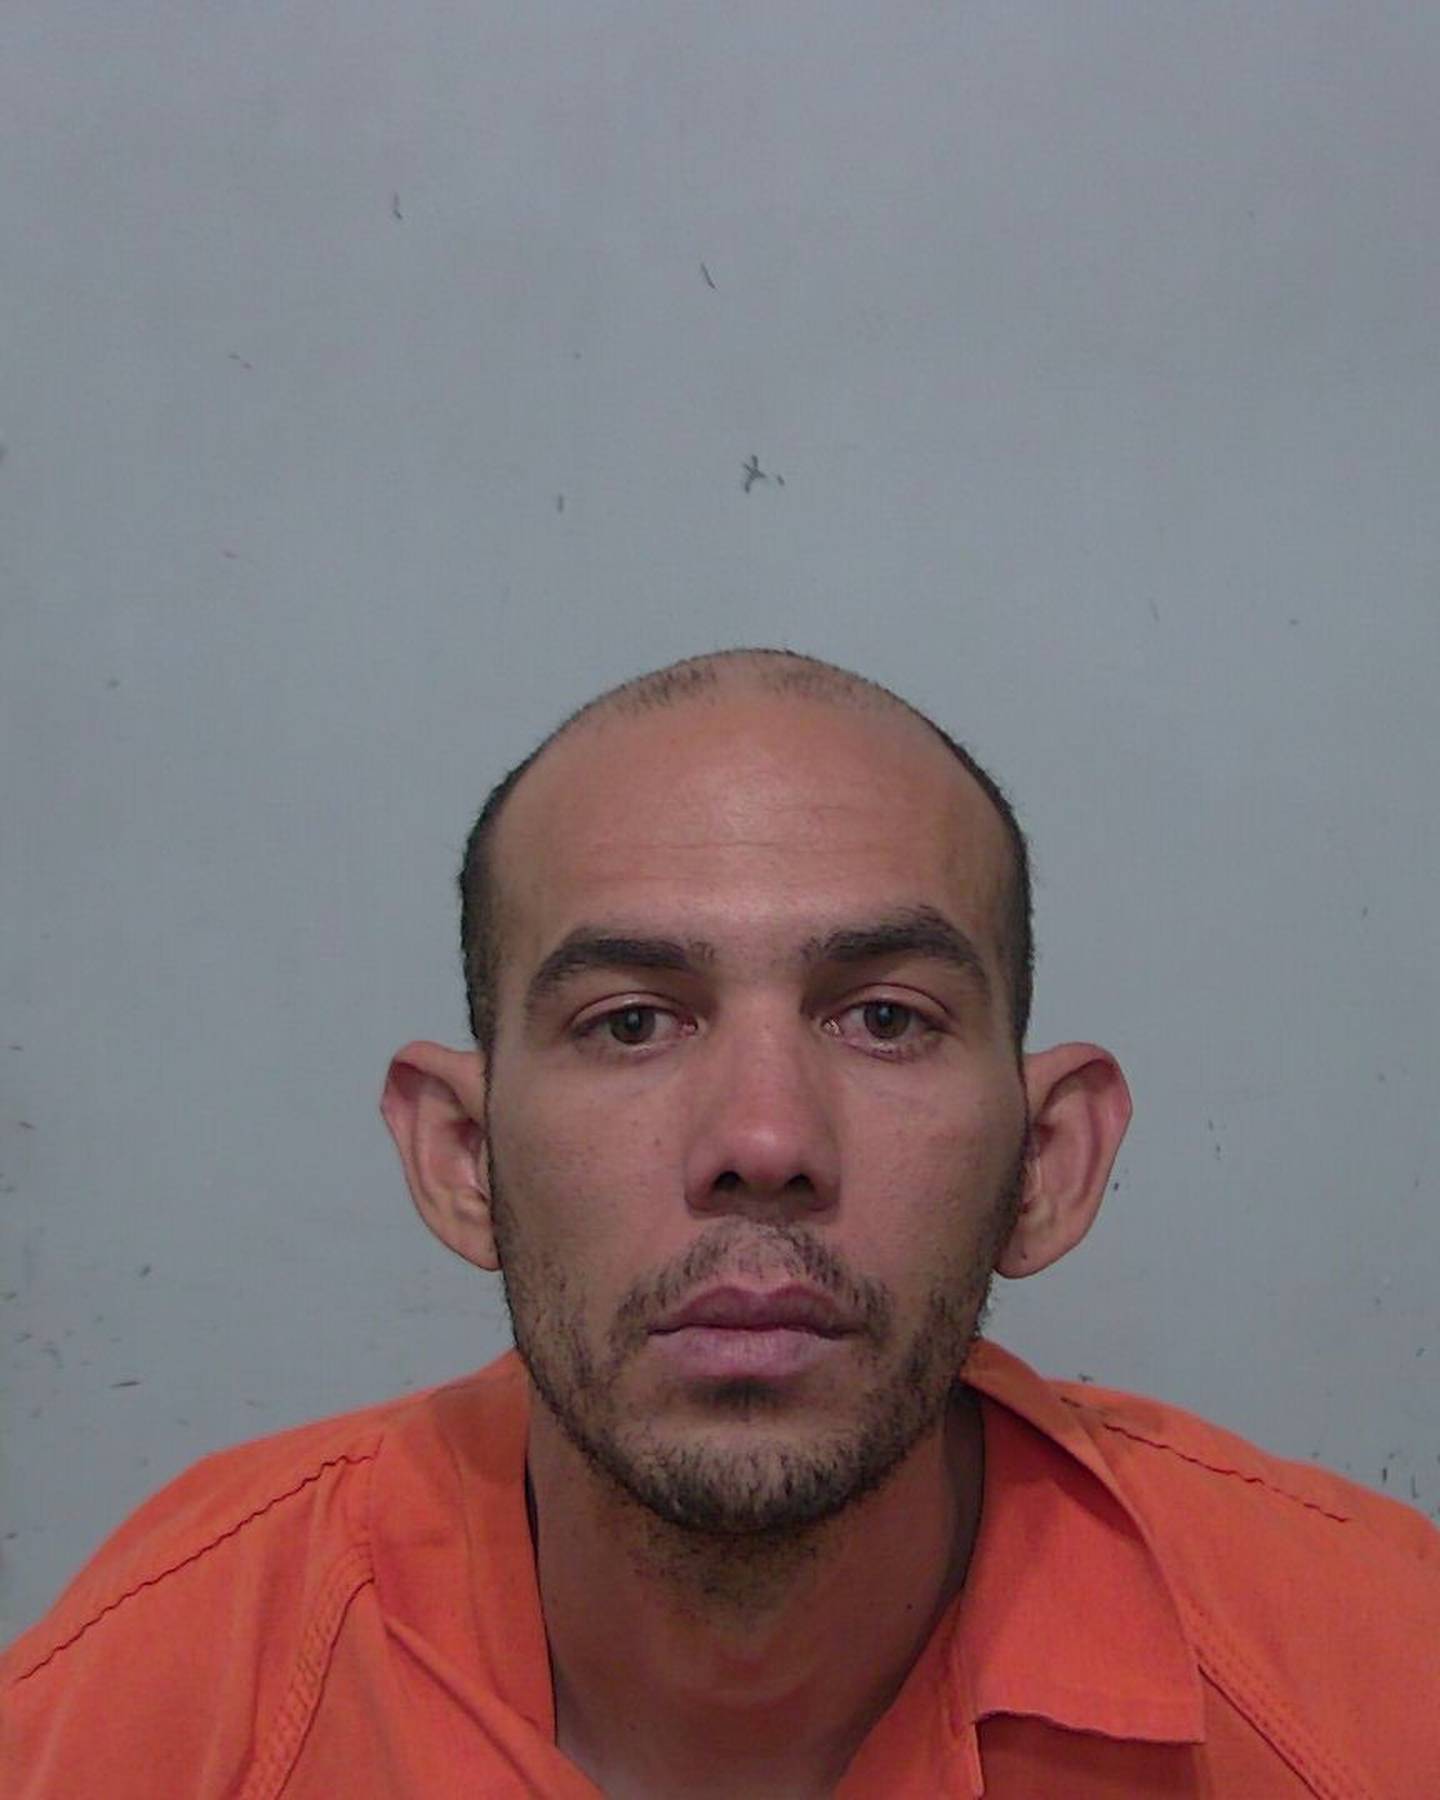 Columbia County Sheriff’s Office said the Selwyn Diaz Diaz, 35, was arrested by detectives after he had been talking with who he thought was a 14-year-old girl.